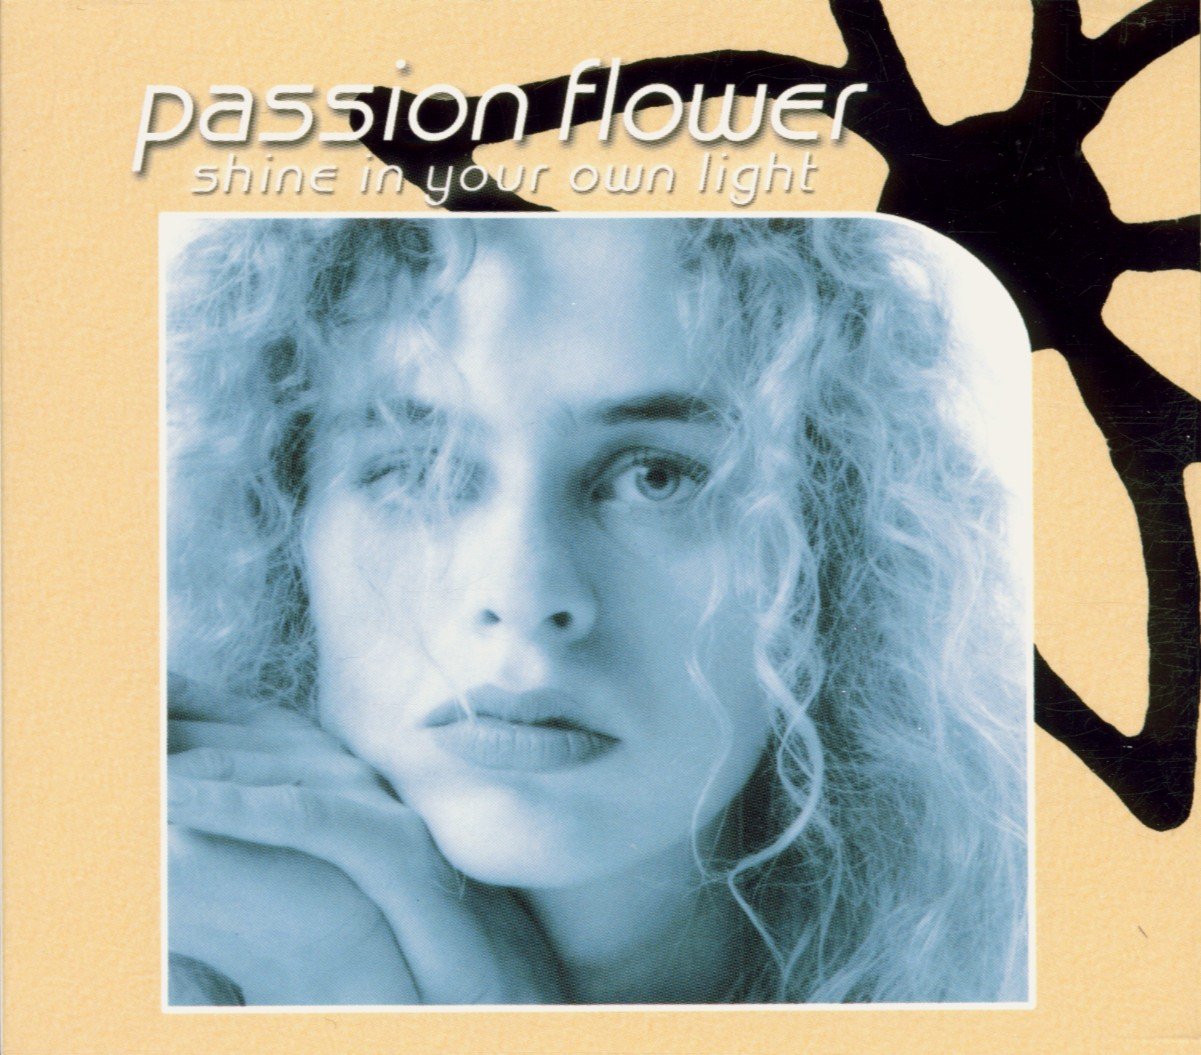 CD Shop - PASSION FLOWER SHINE IN YOUR OWN LIGHT